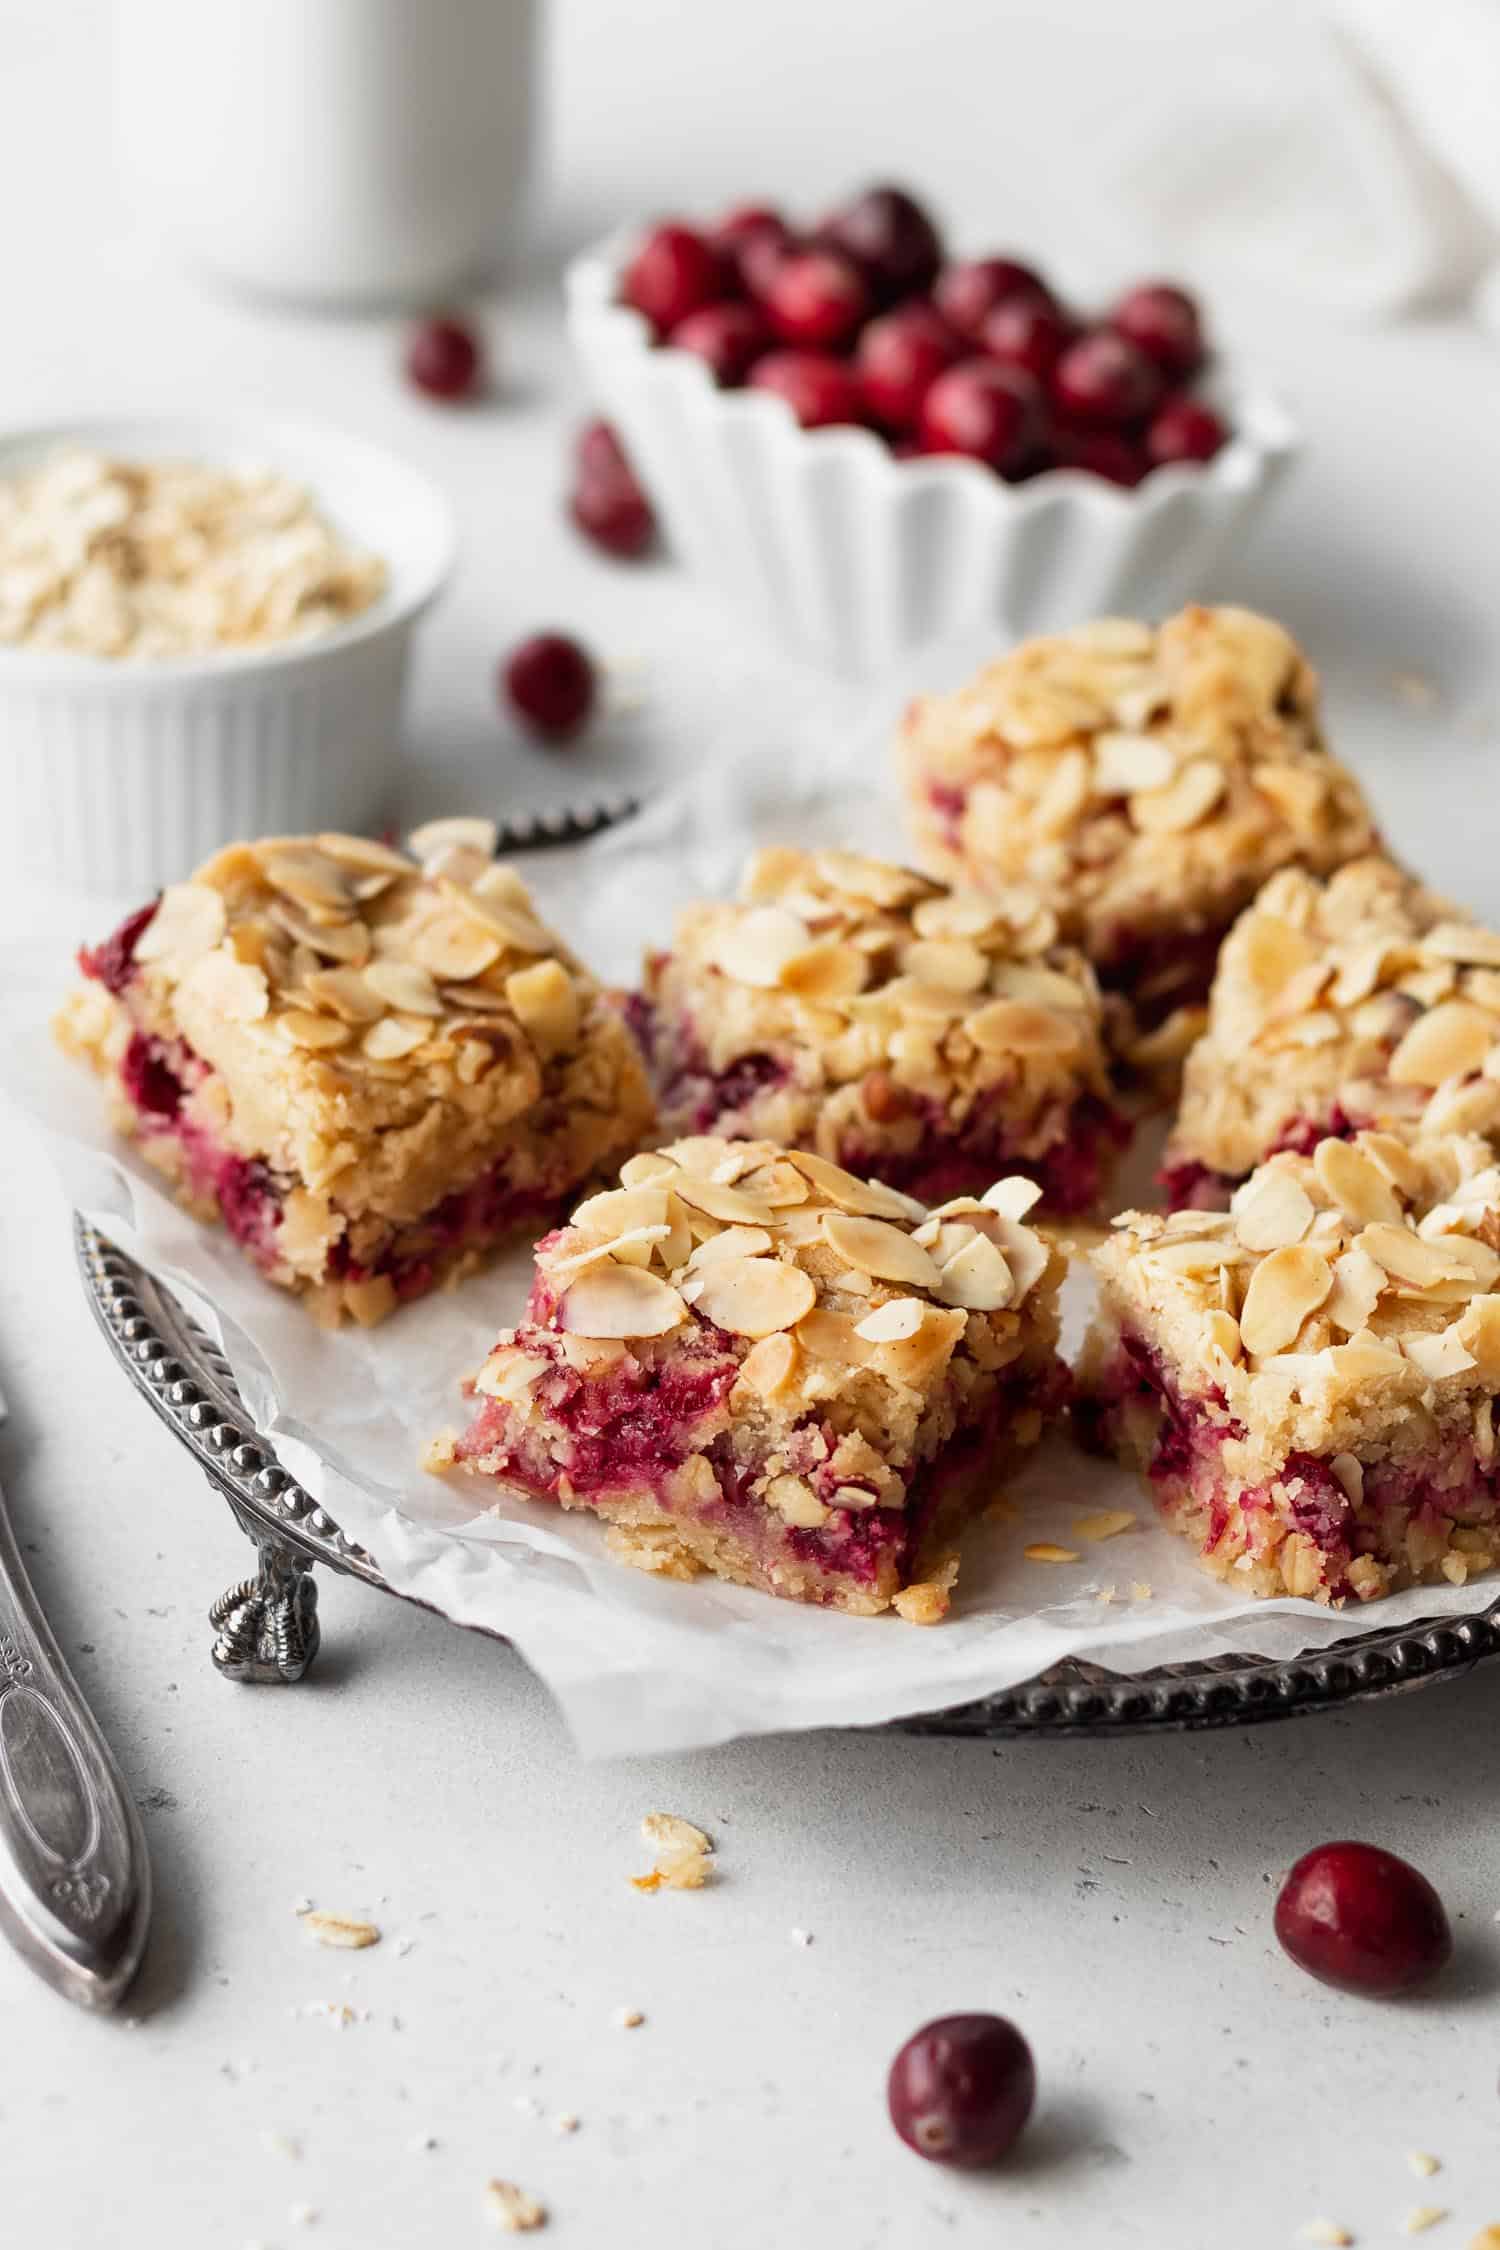 Oatmeal bars with cranberries on a platter